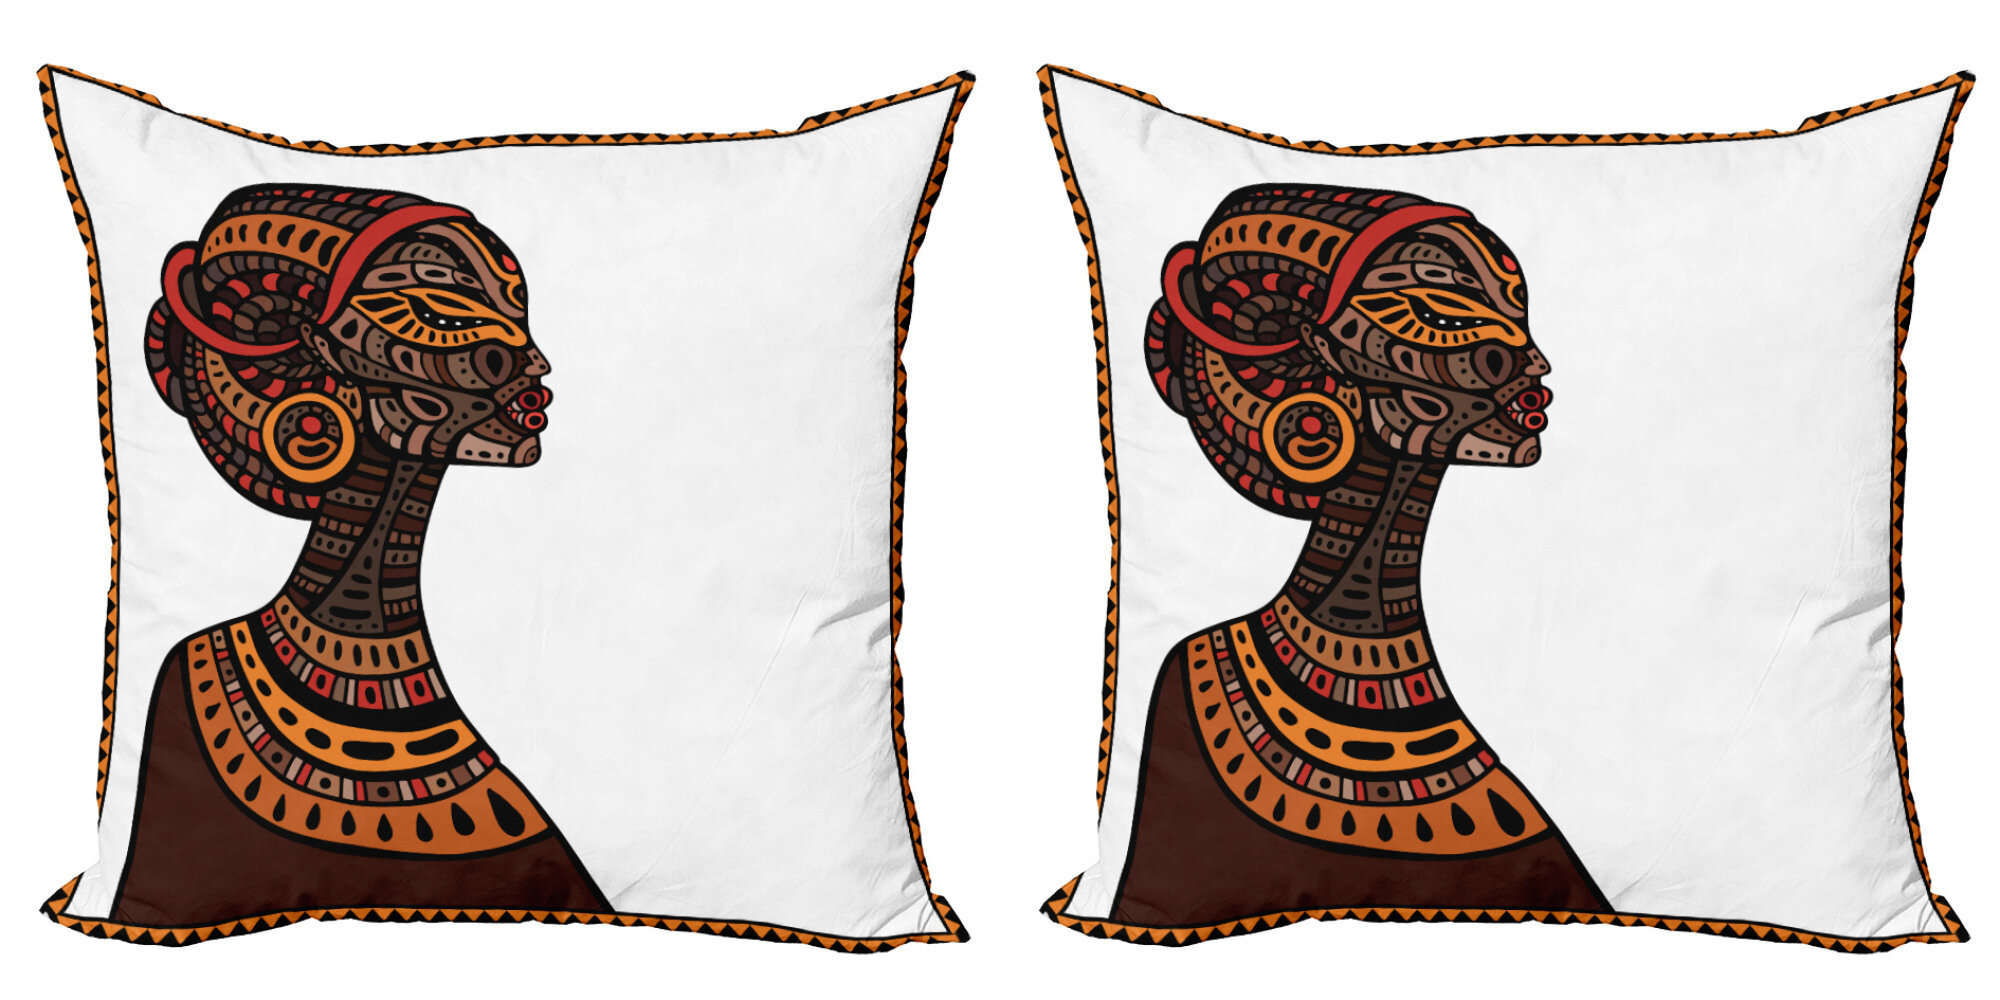 Africa Girl Throw Pillow Covers Case Decorative Throw Cushion Decor for Sofa Couch Room Bed Car 18 x 18 Inch Set of 4 with Hidden Zipper 